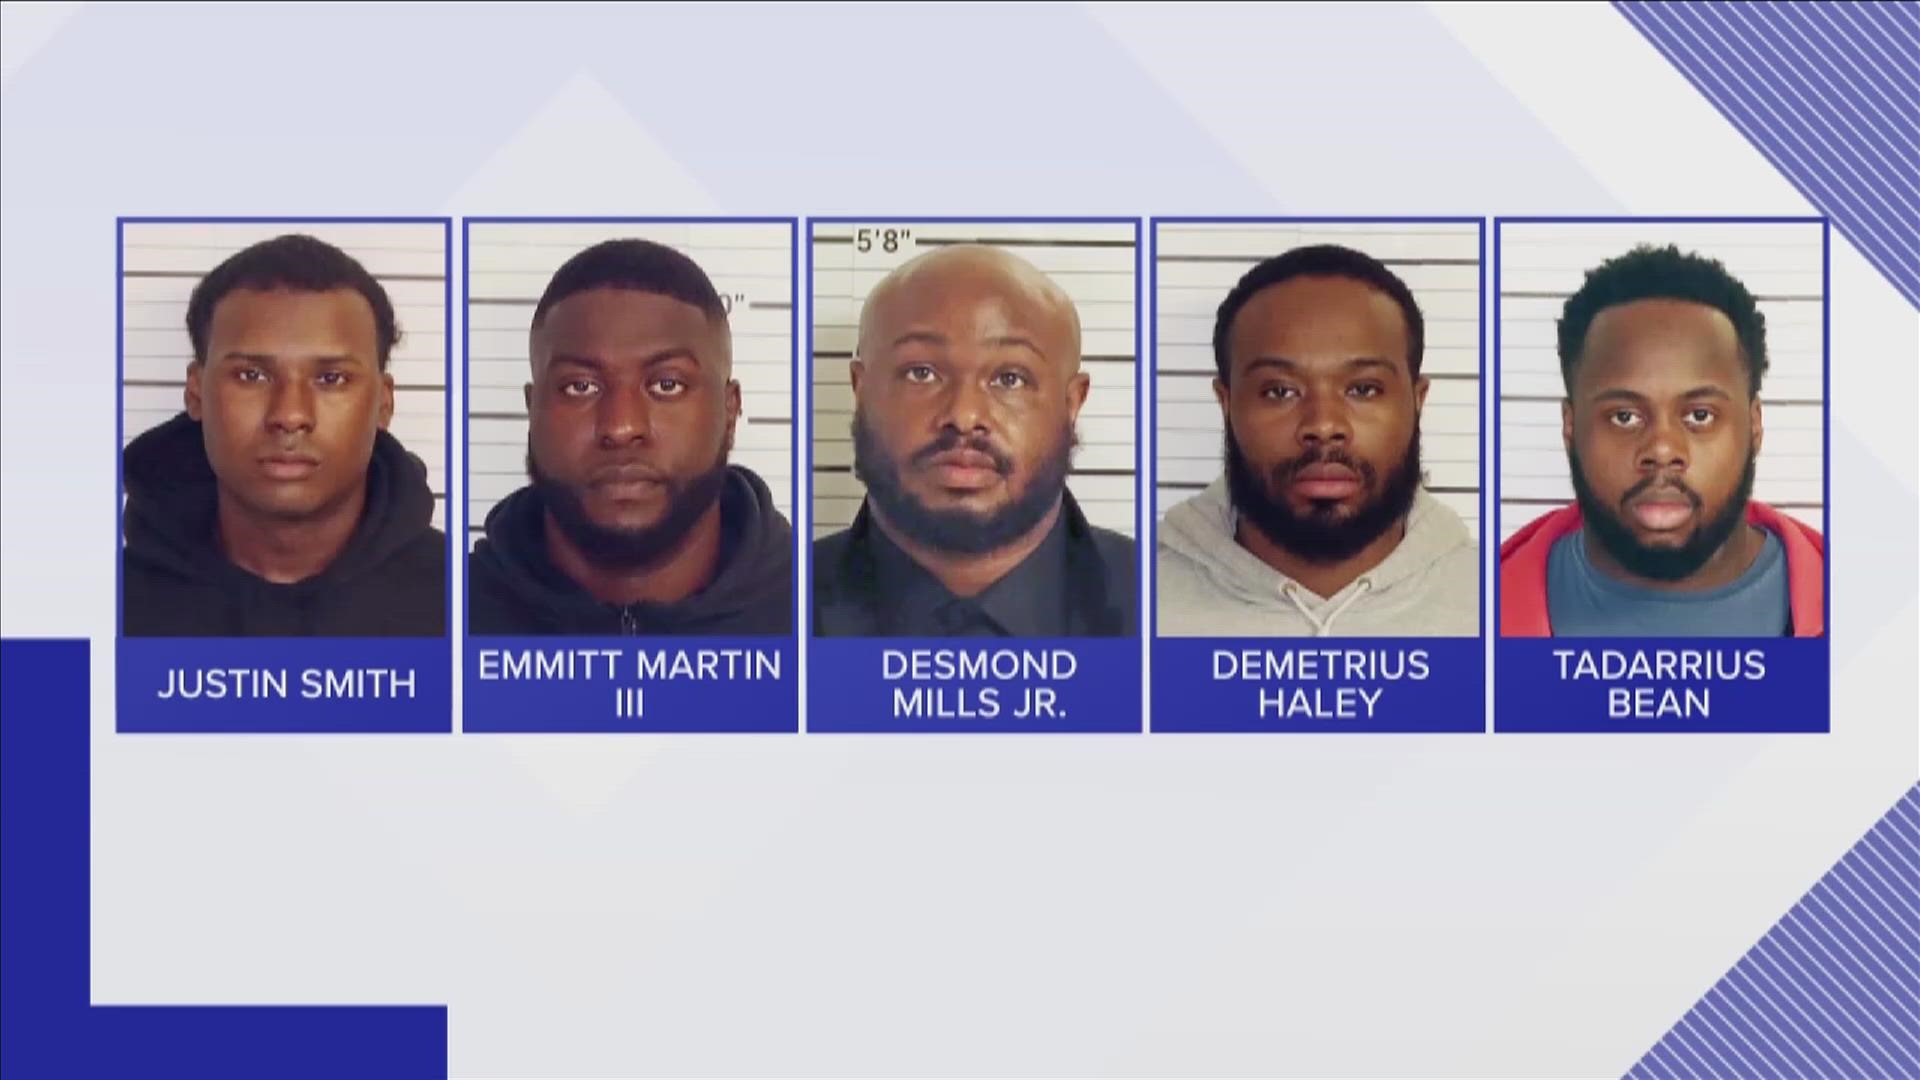 Here are several updates ahead of the first hearing for the five former MPD officers charged with murdering Tyre Nichols.